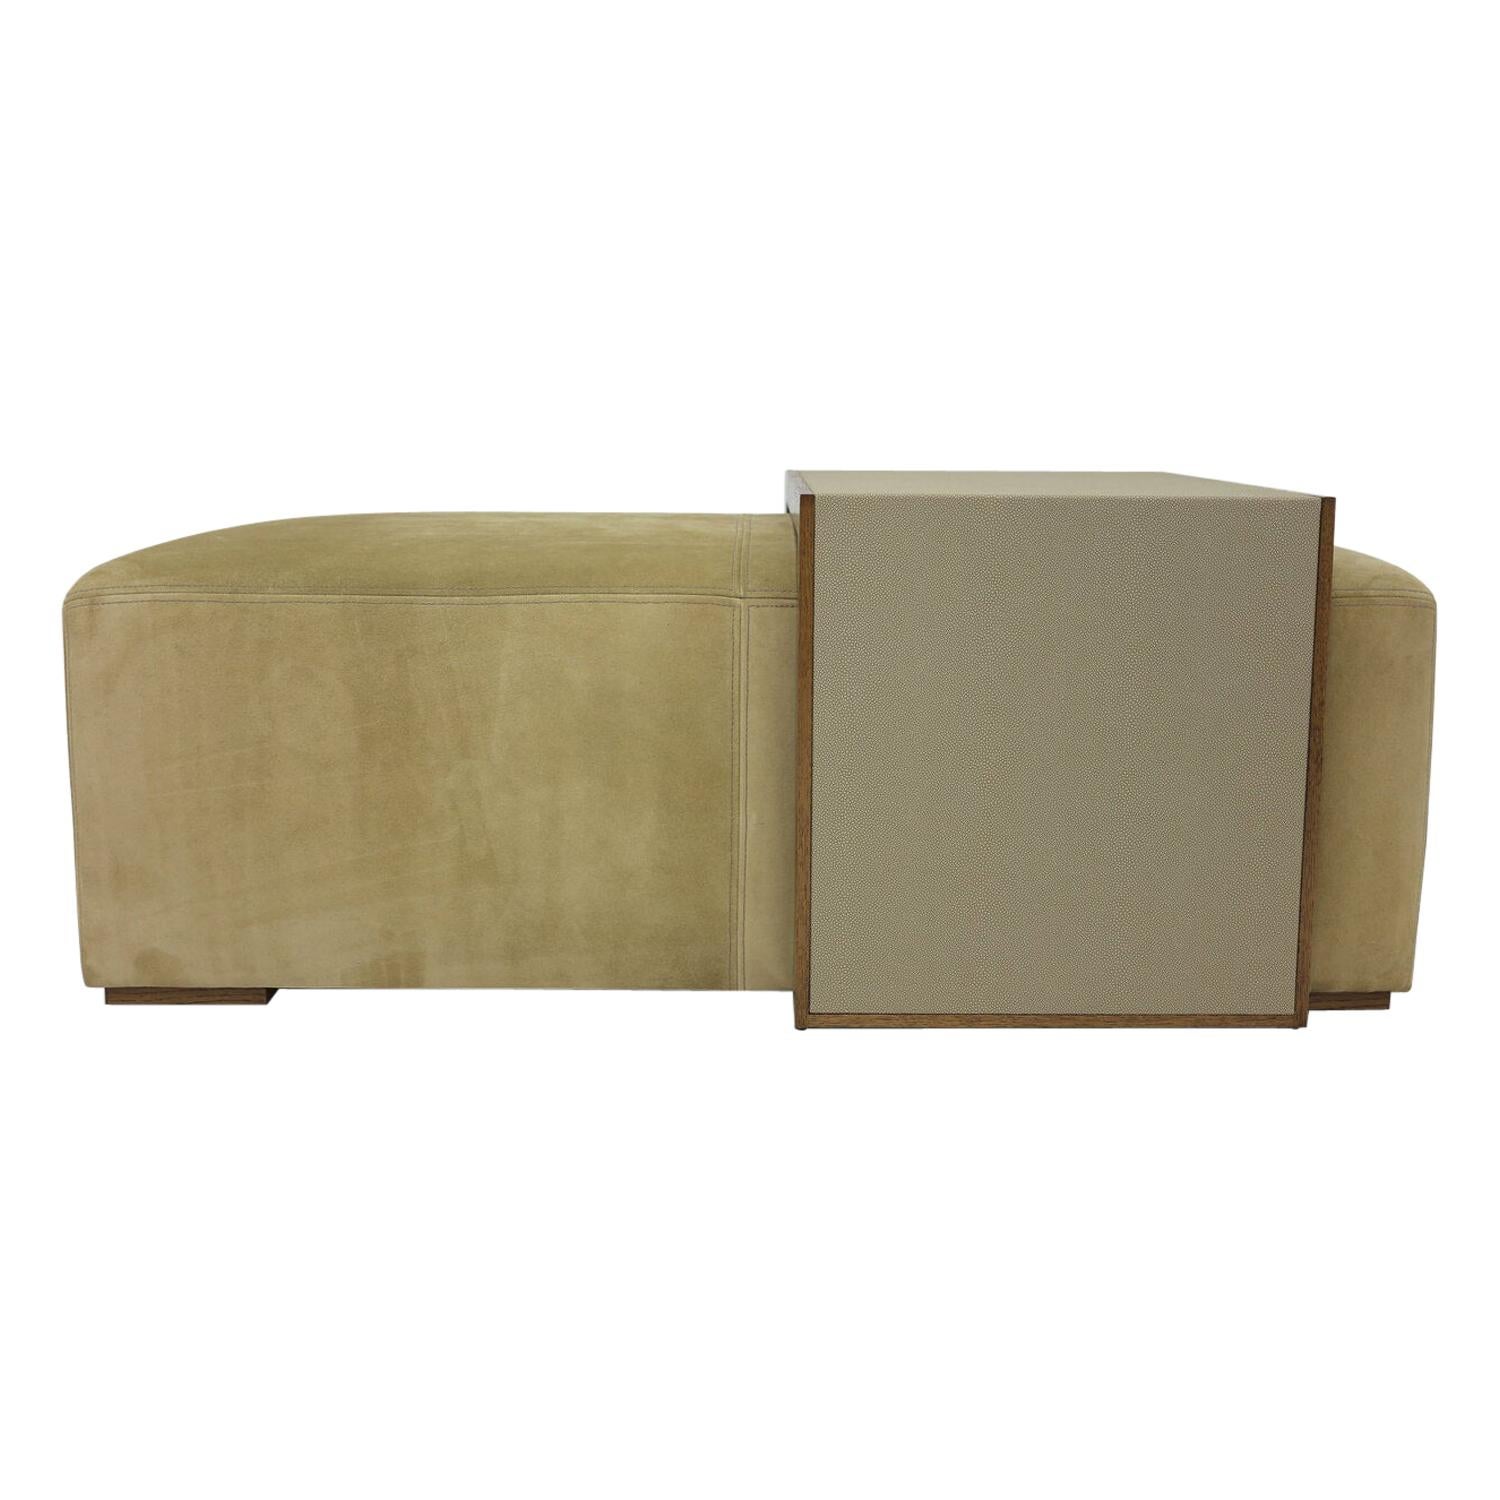 Custom Ottoman and Wood Table Shown in Suede and Oak with Faux Shagrin